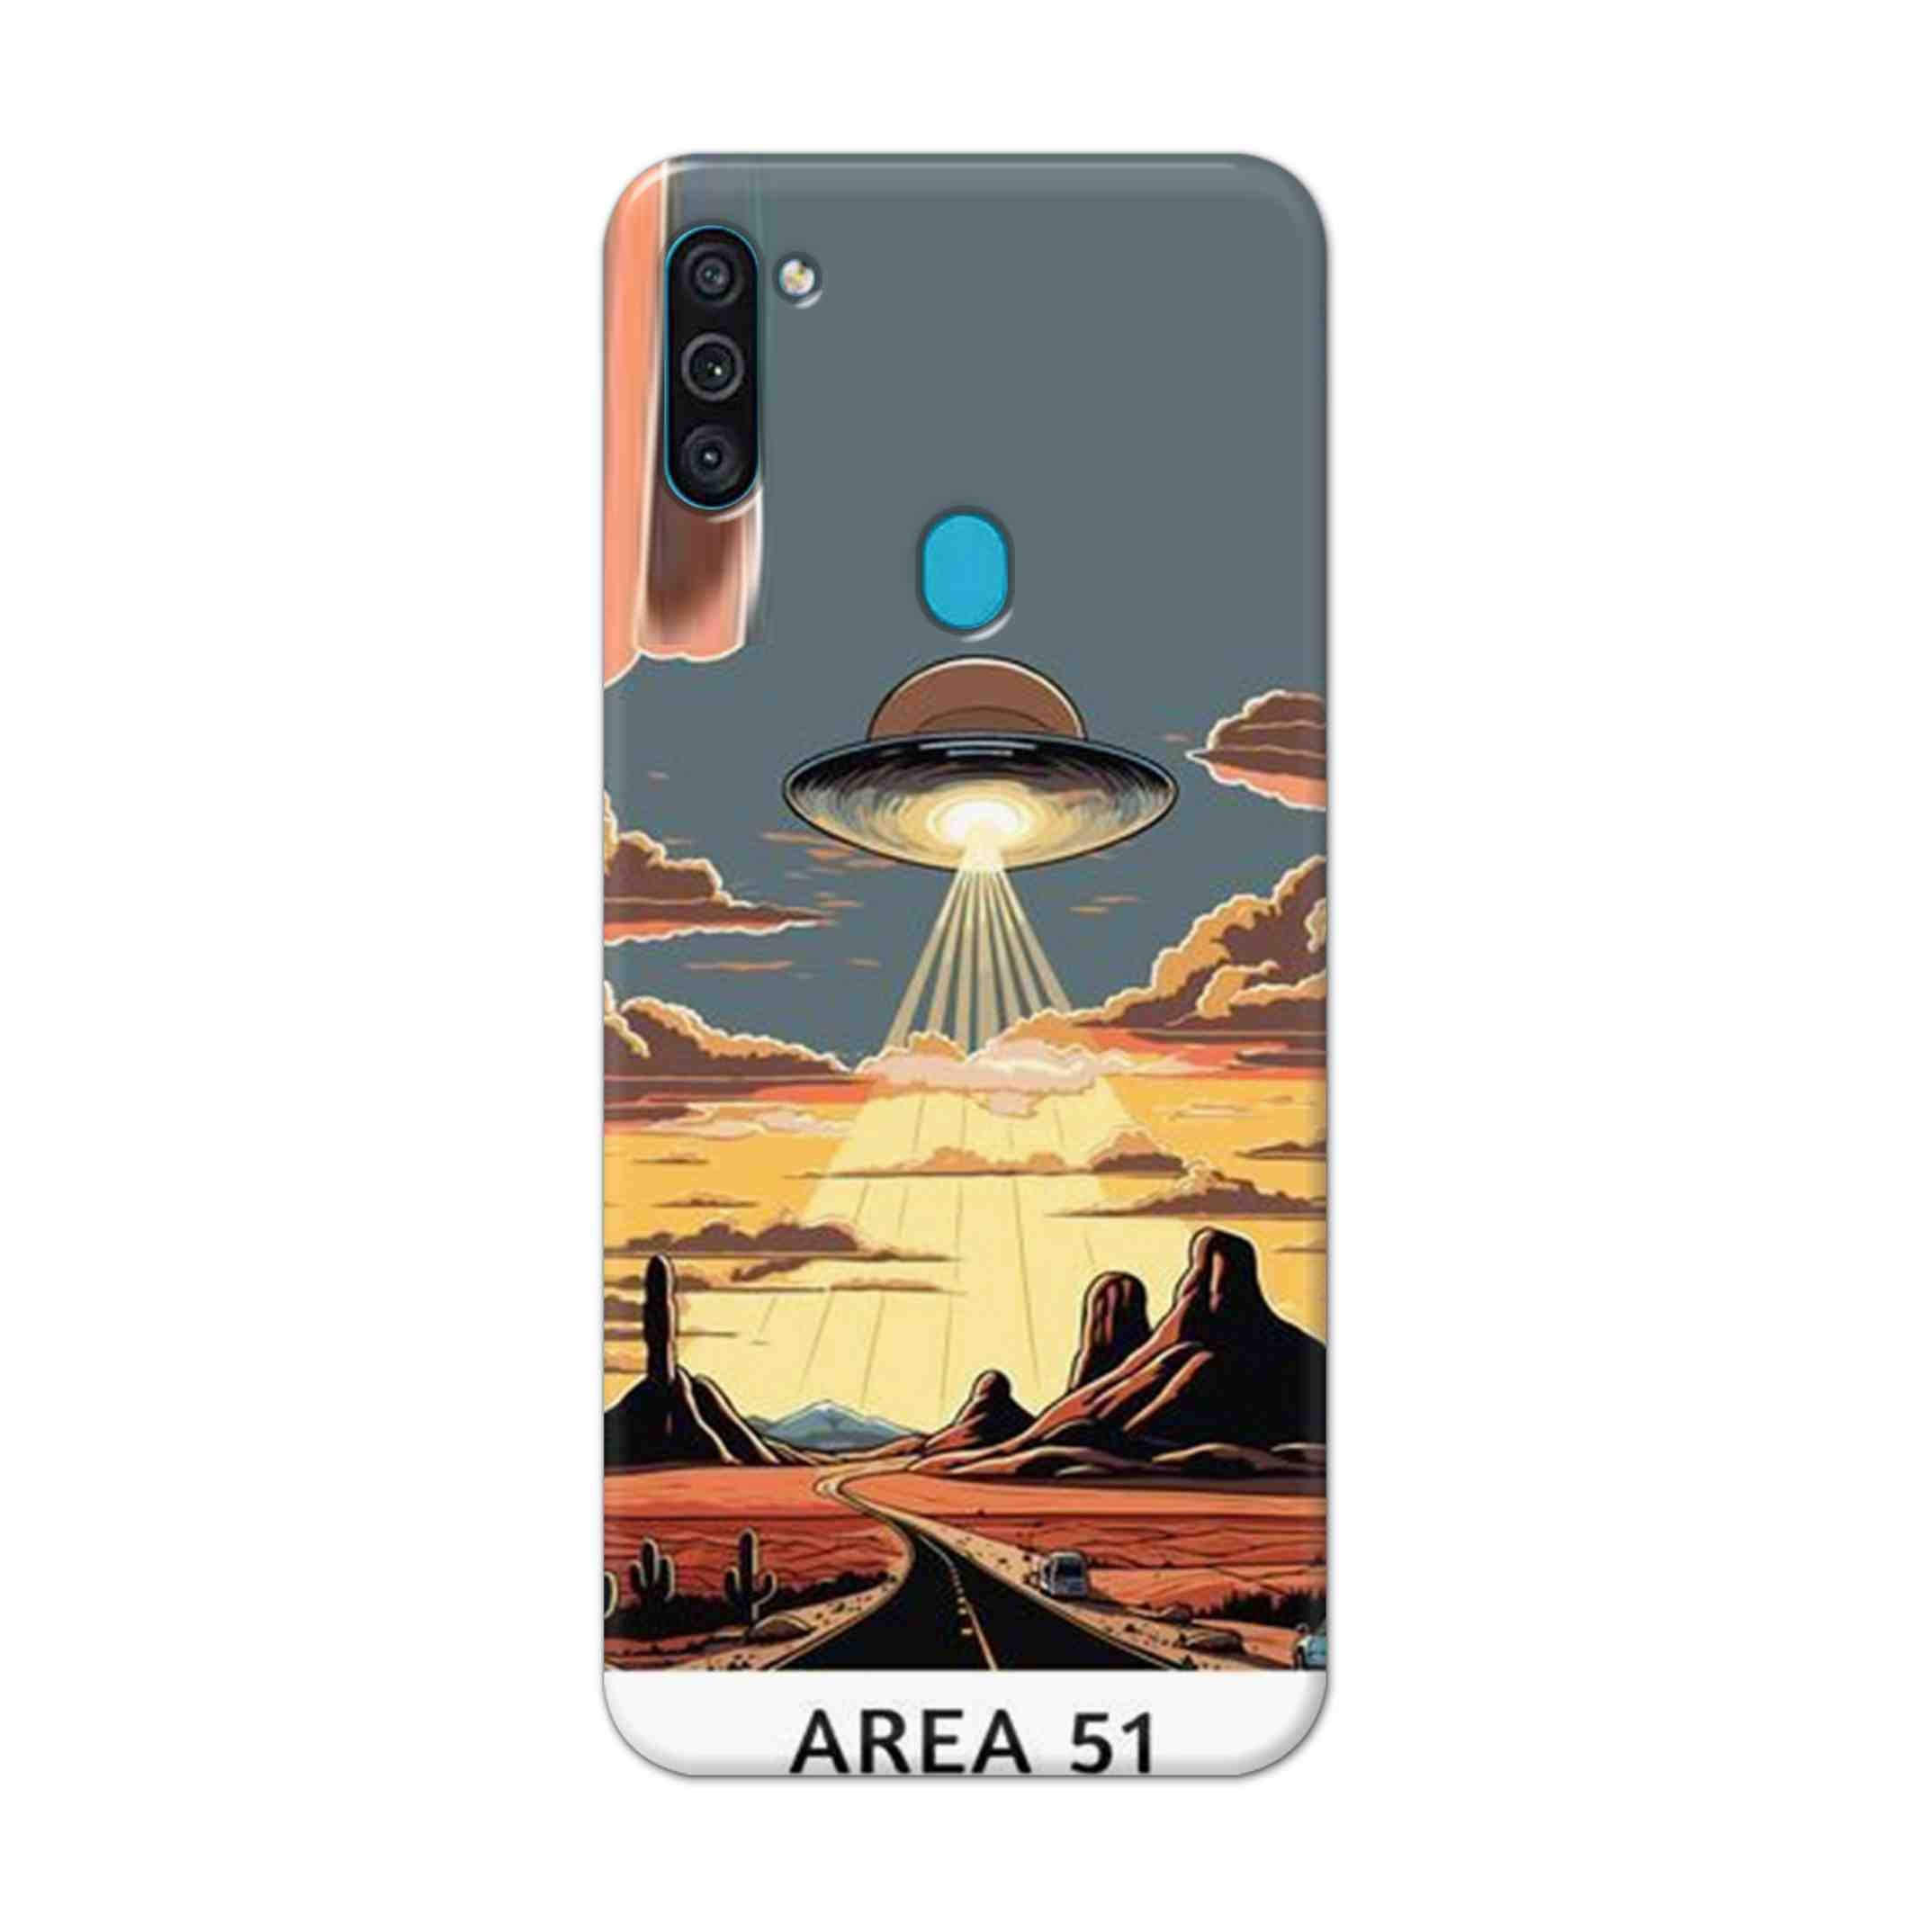 Buy Area 51 Hard Back Mobile Phone Case Cover For Samsung Galaxy M11 Online